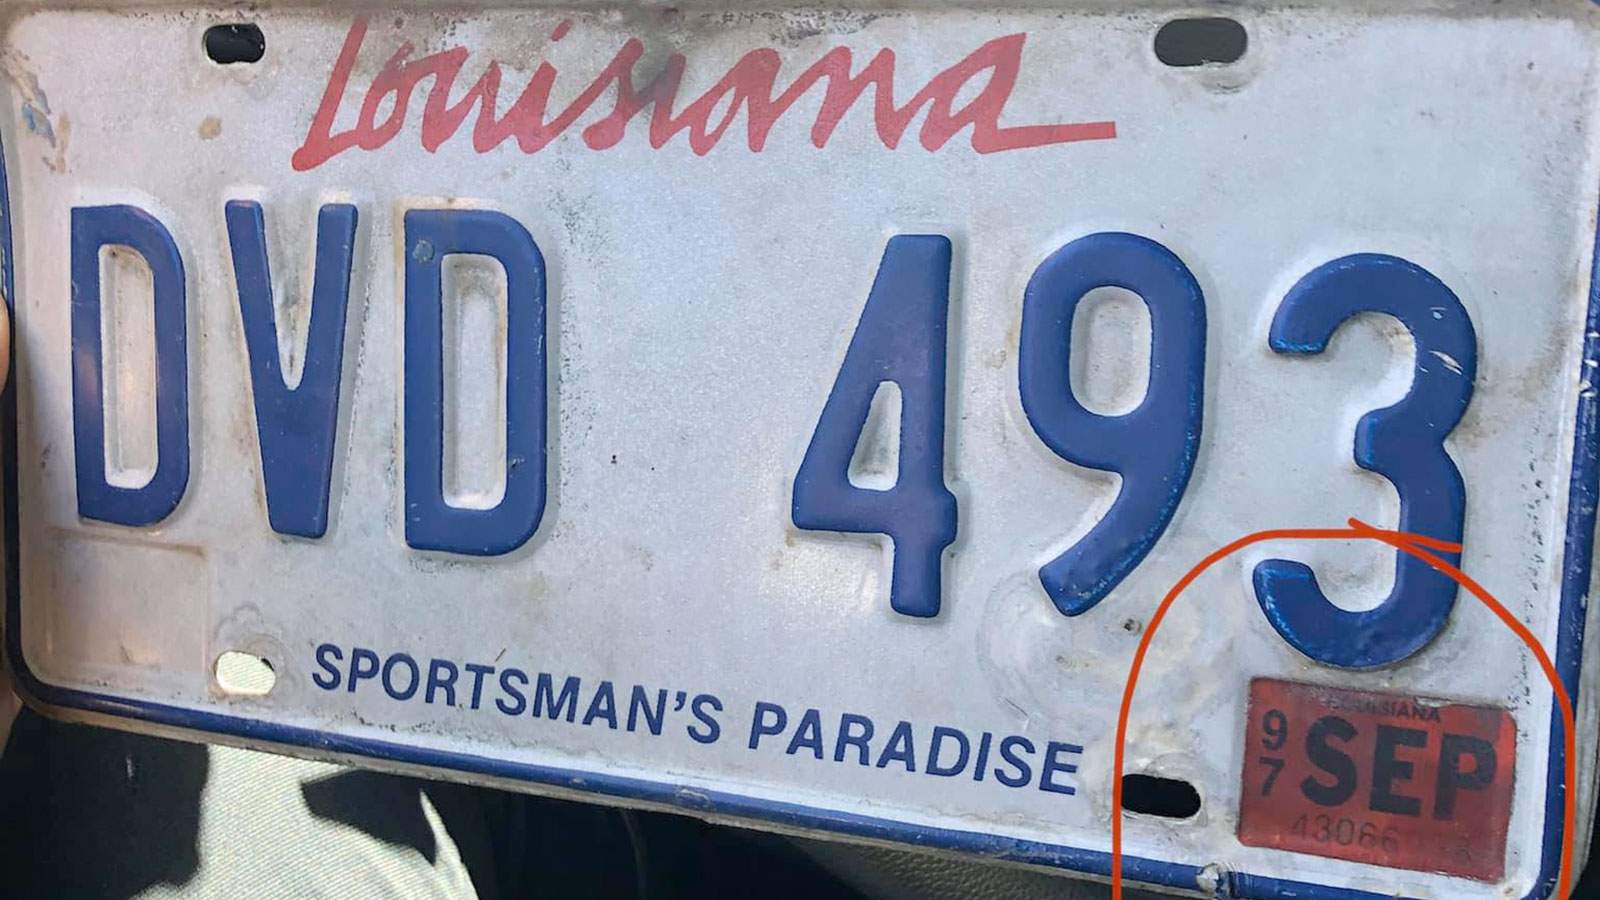 A driver with expired 1997 license plate tags tells police he’s been busy